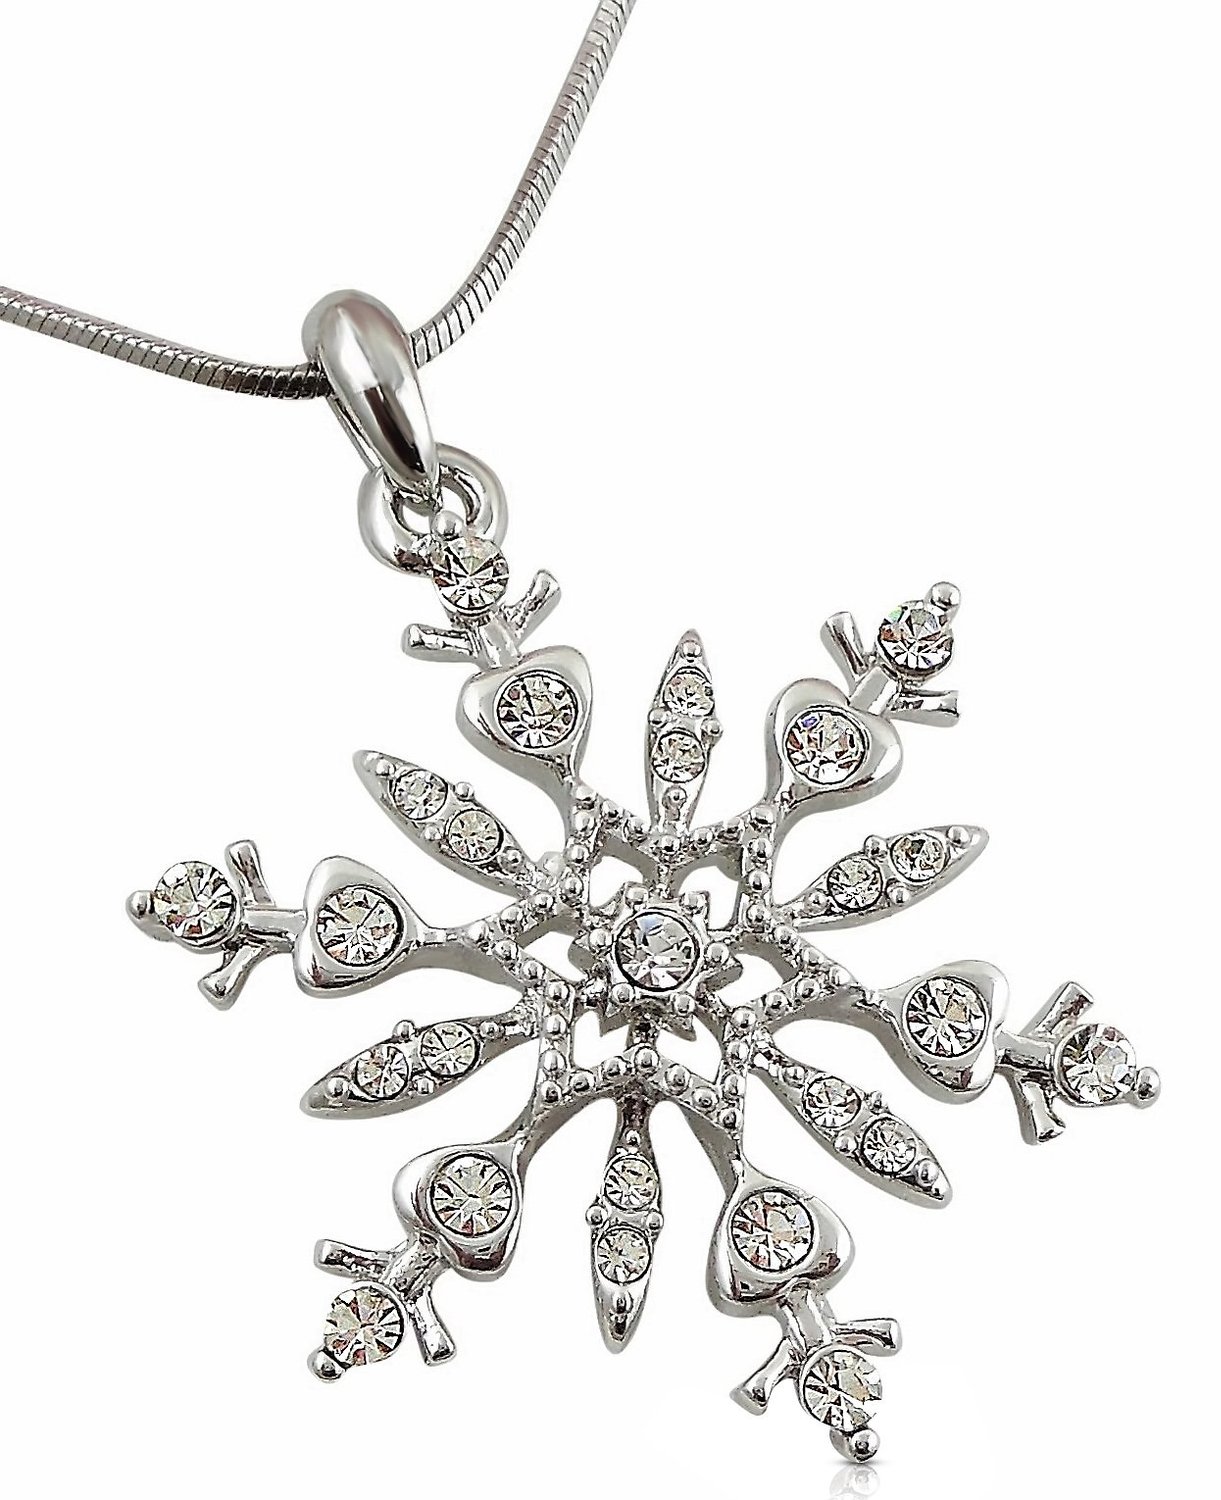 Beautiful Large 11/4" Silver Tone Snowflake Crystal Pendant Necklace